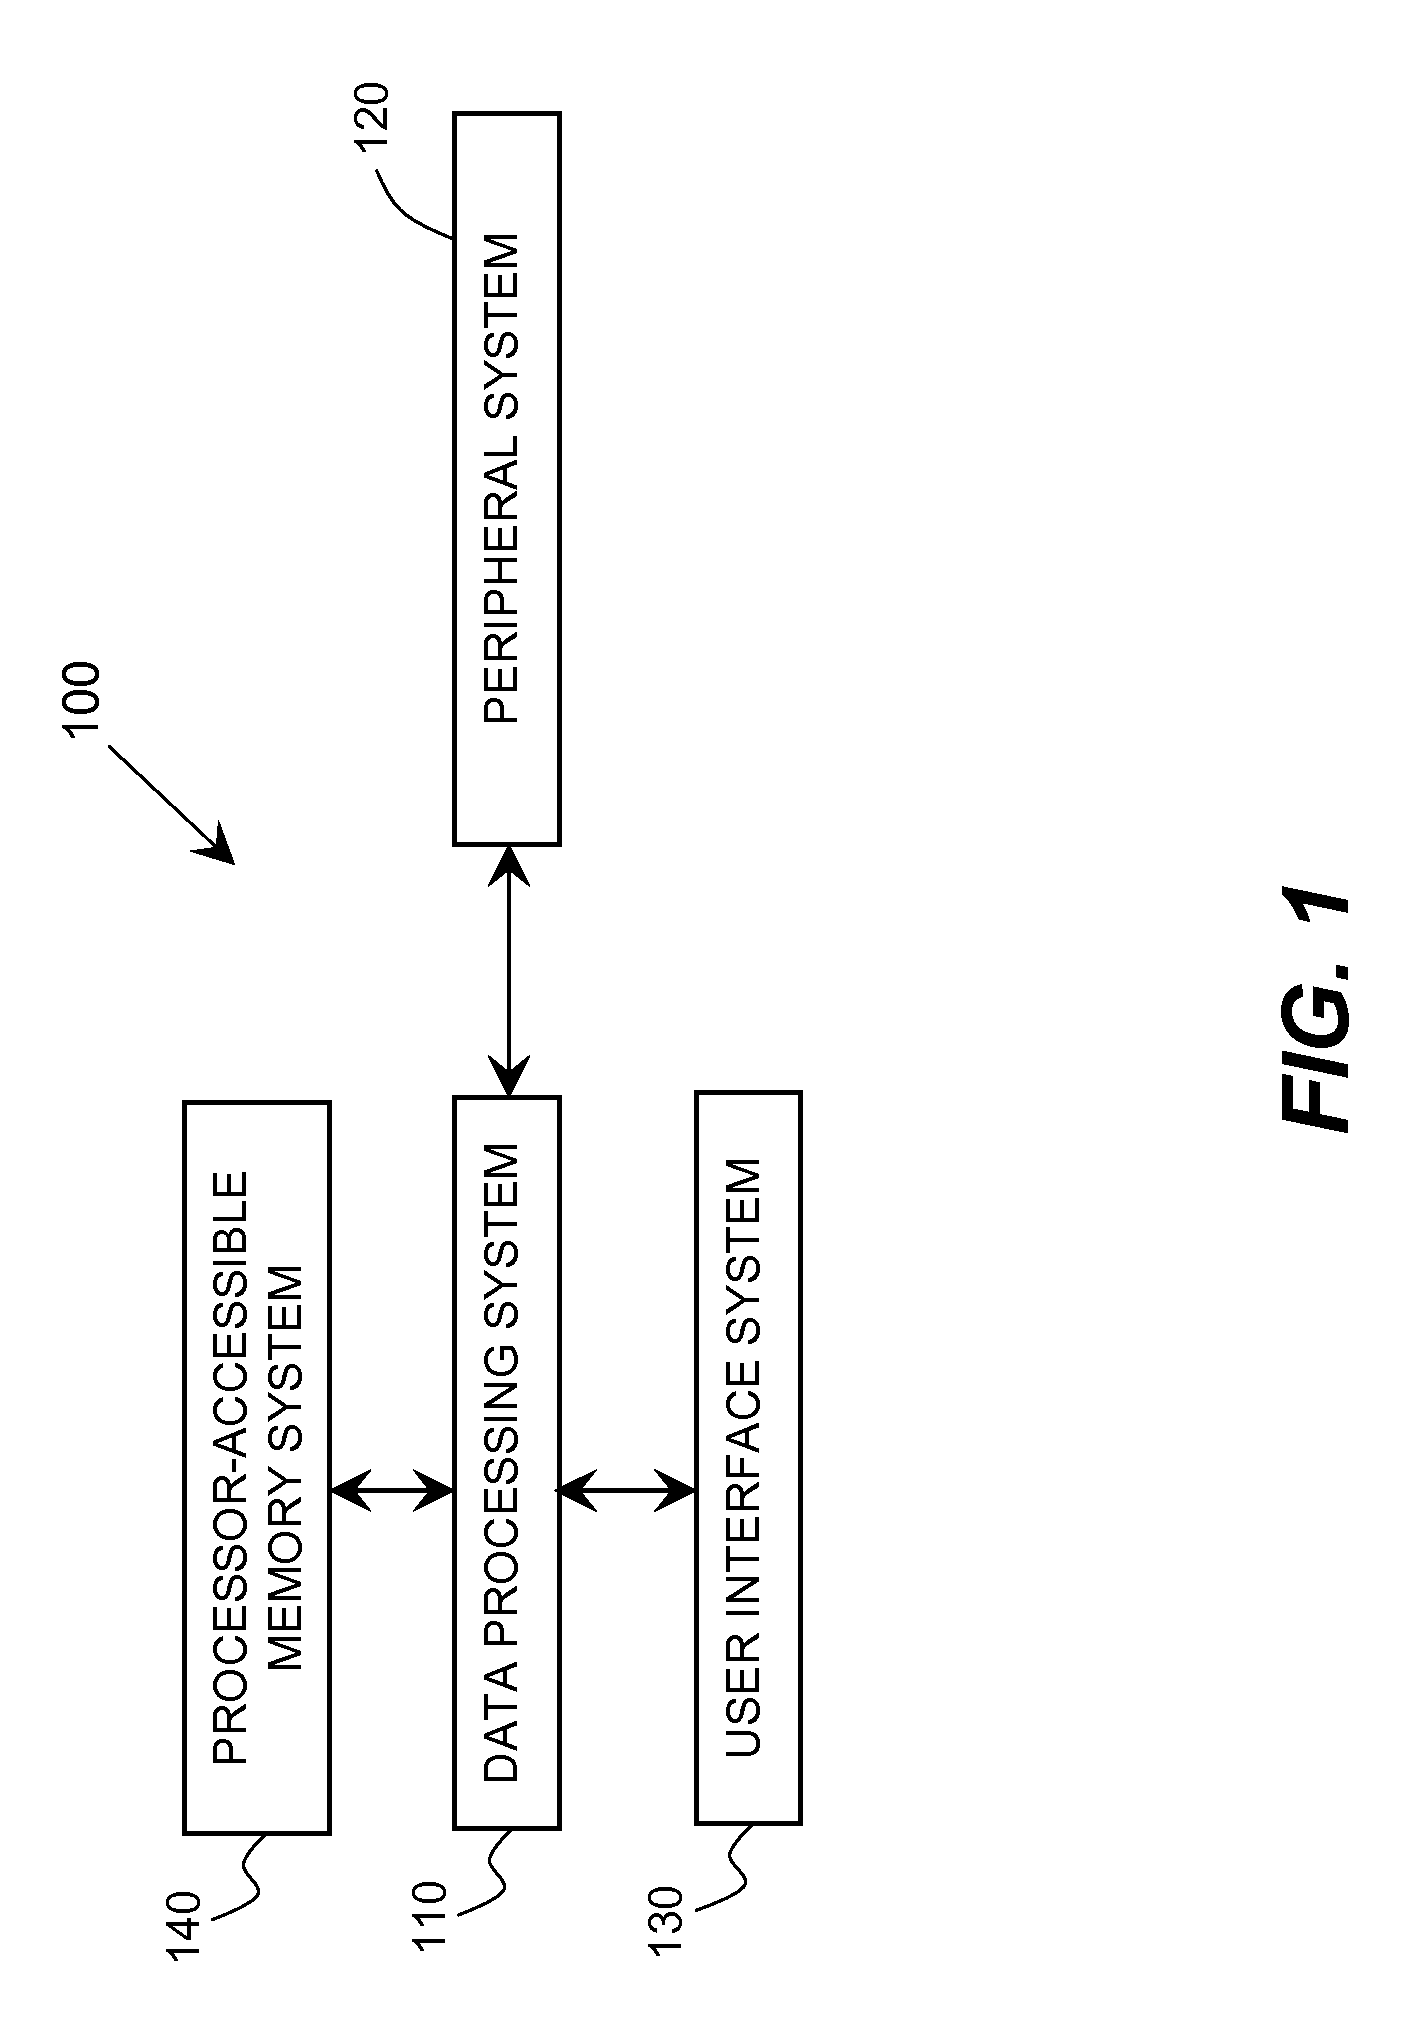 Method for forming an improved image using images with different resolutions